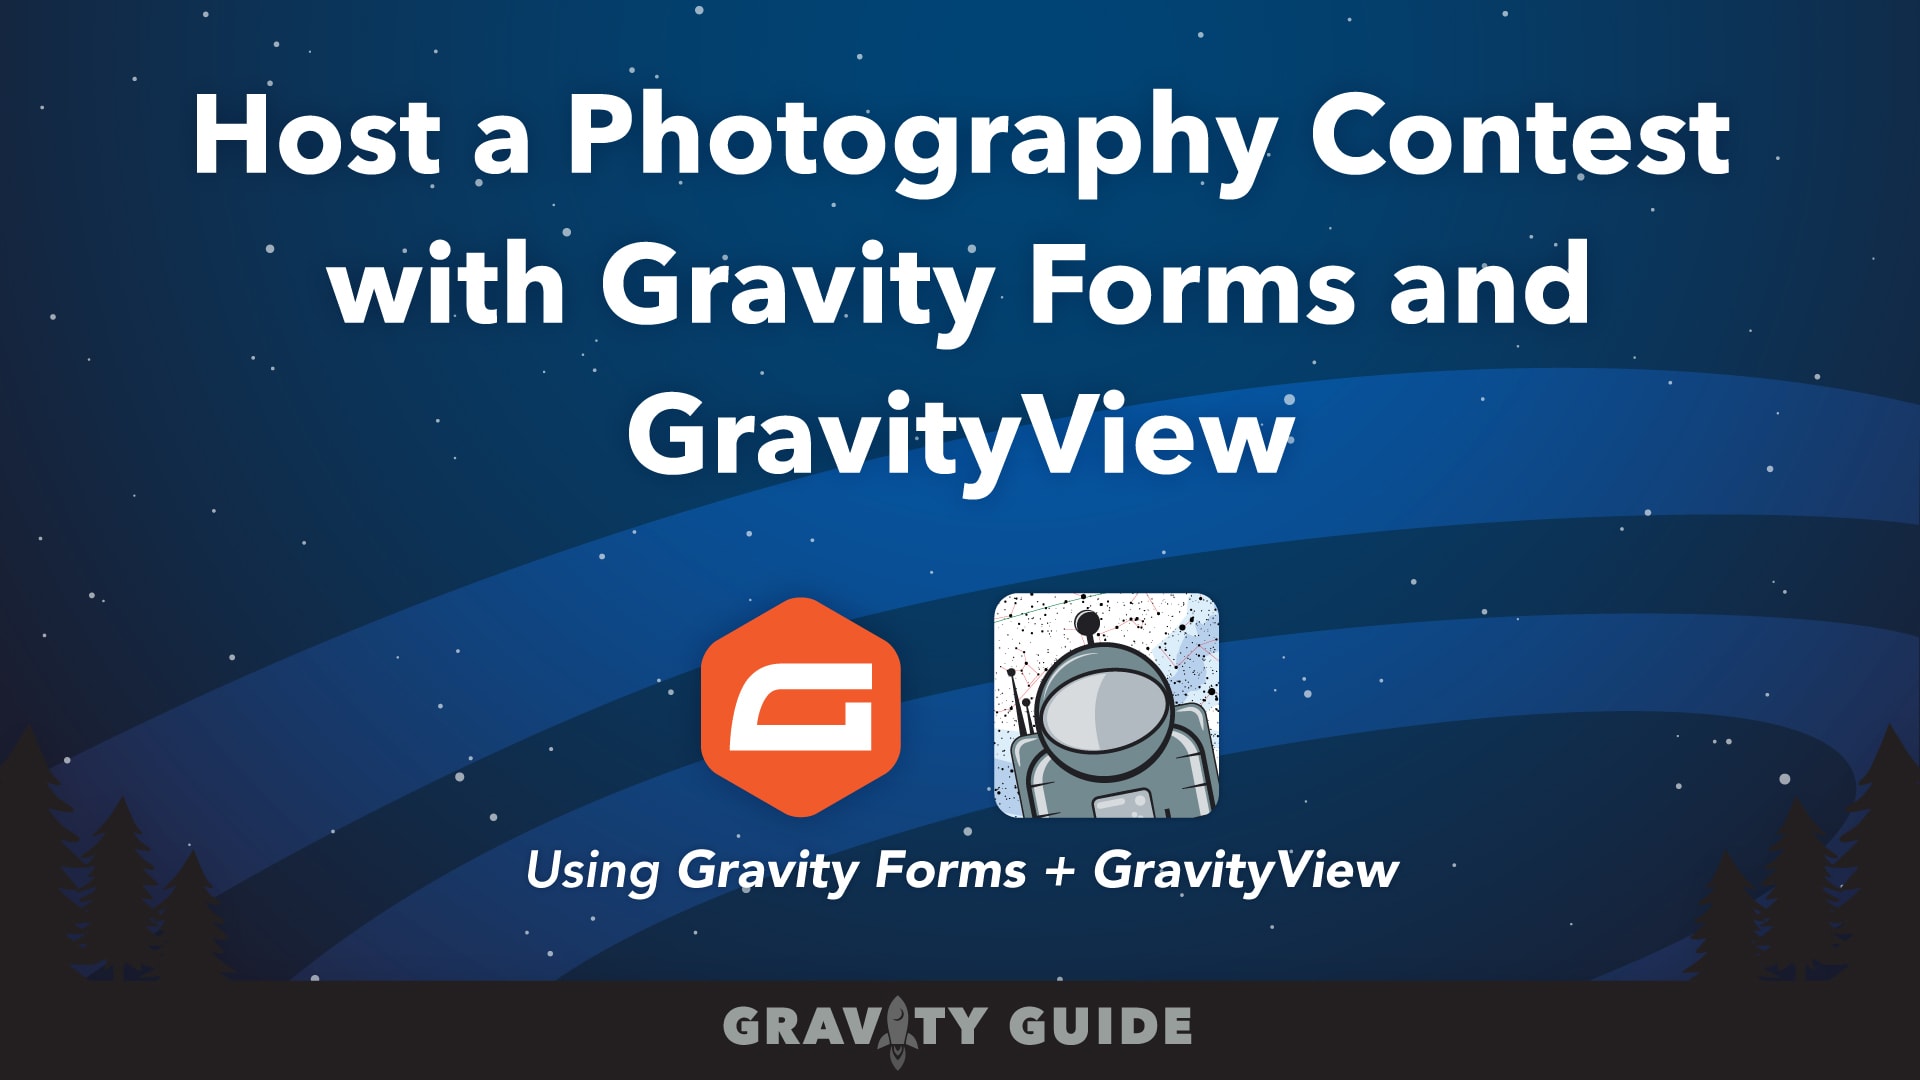 Host a Photography Contest with Gravity Forms and GravityView